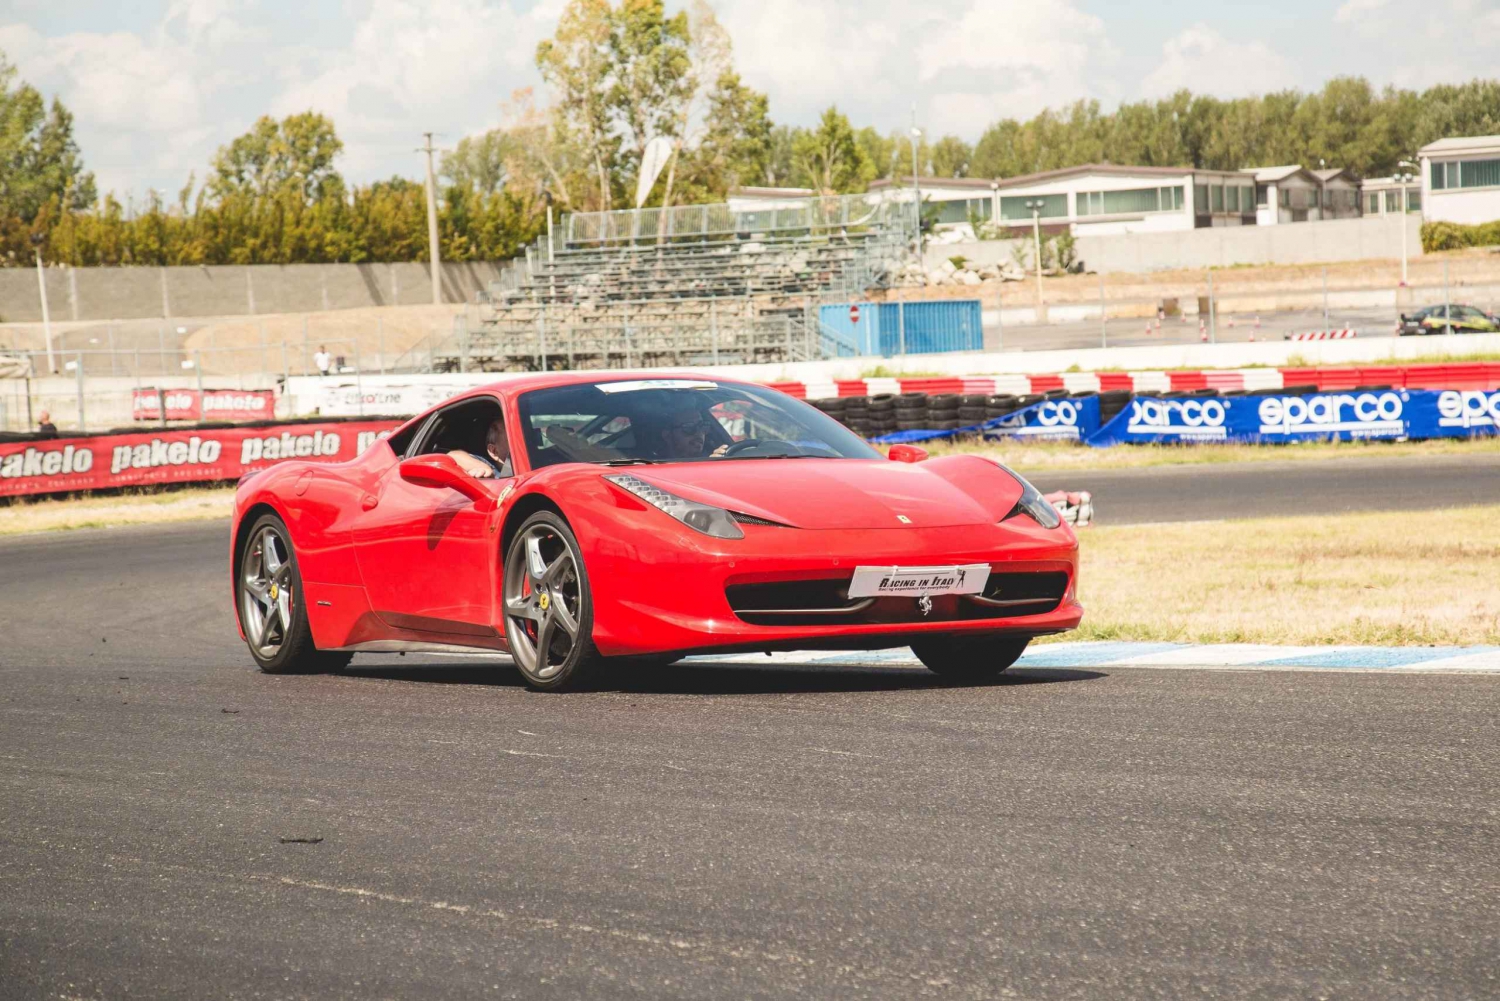 Milan: Test Drive a Ferrari 458 on a Race Track with Video